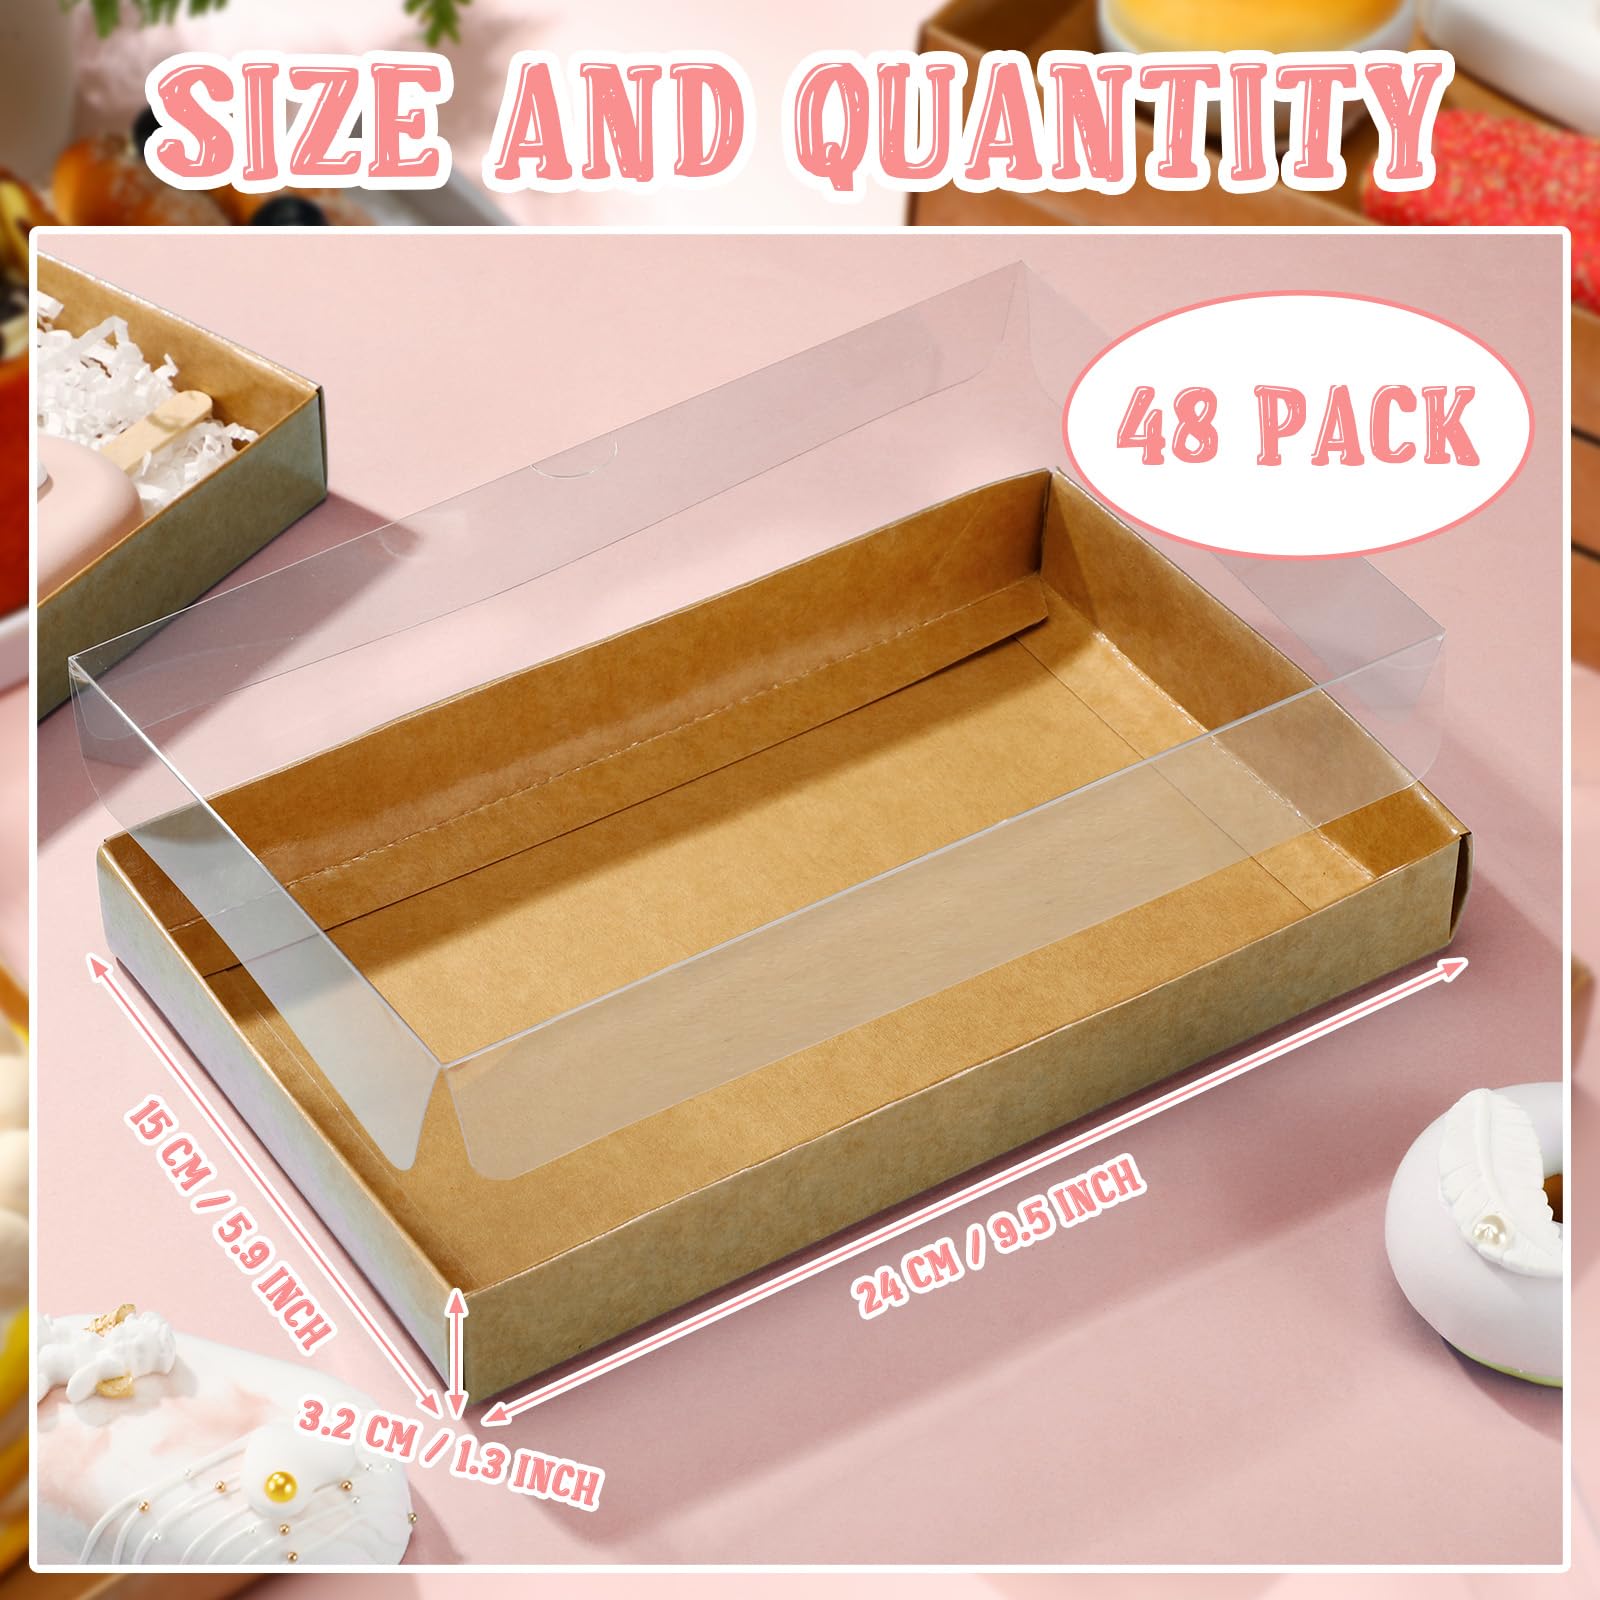 Karenhi 48 Pcs Clear Cookie Boxes with Full Window 9.5 x 5.9 x 1.3 in Bakery Treat Boxes Macaron Chocolate Donuts Pastry Clear Lids Packing Boxes for Mother's Day Wedding Grad Party(Brown)